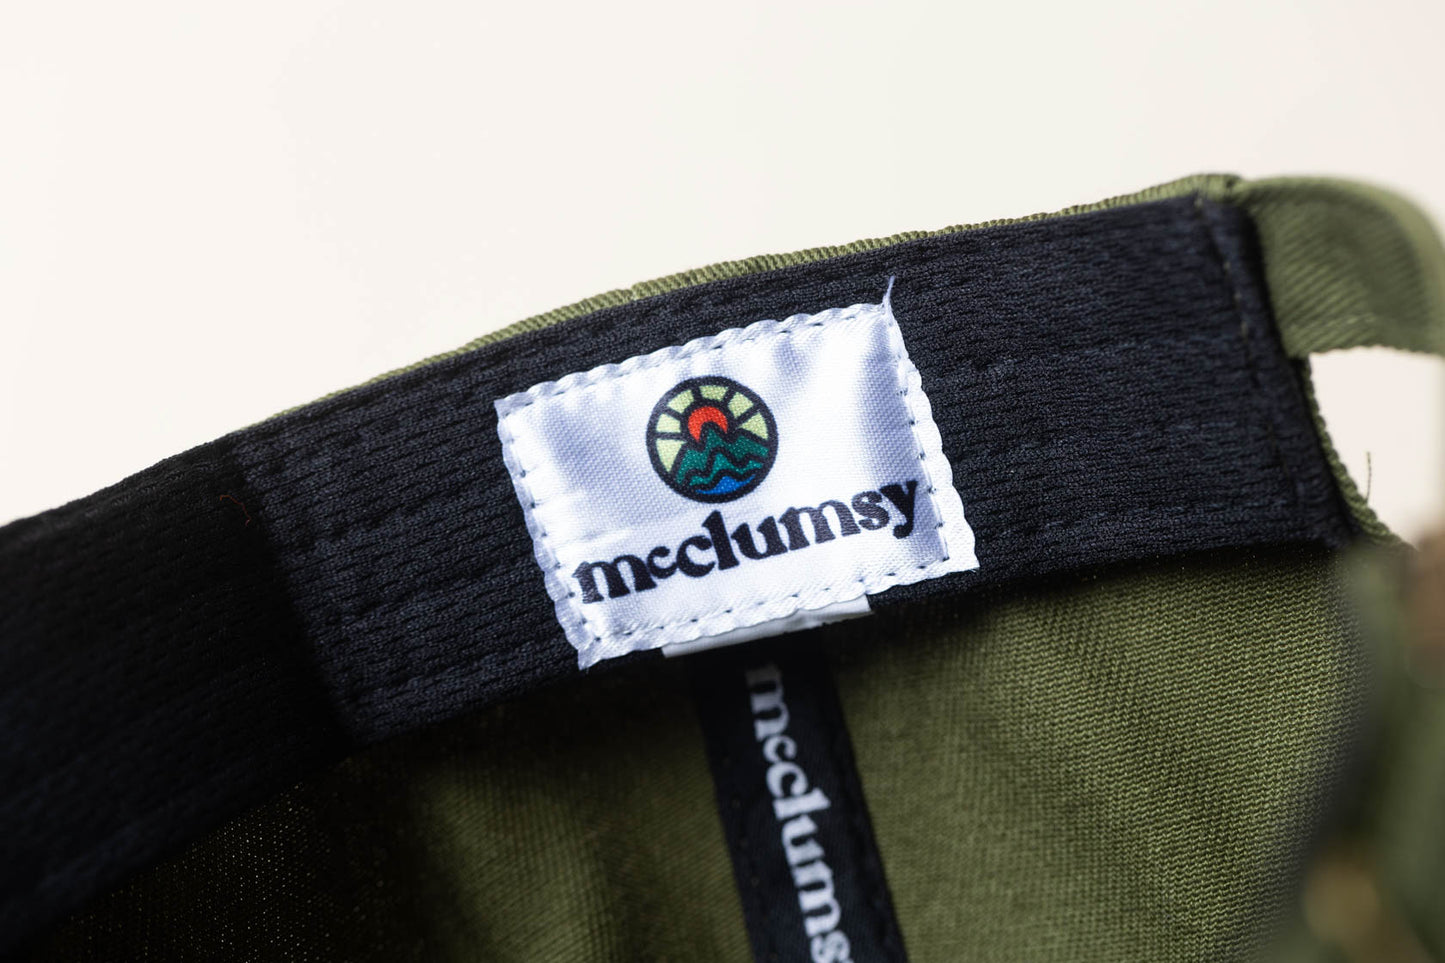 Dad Hat Full Color McClumsy Logo - Olive